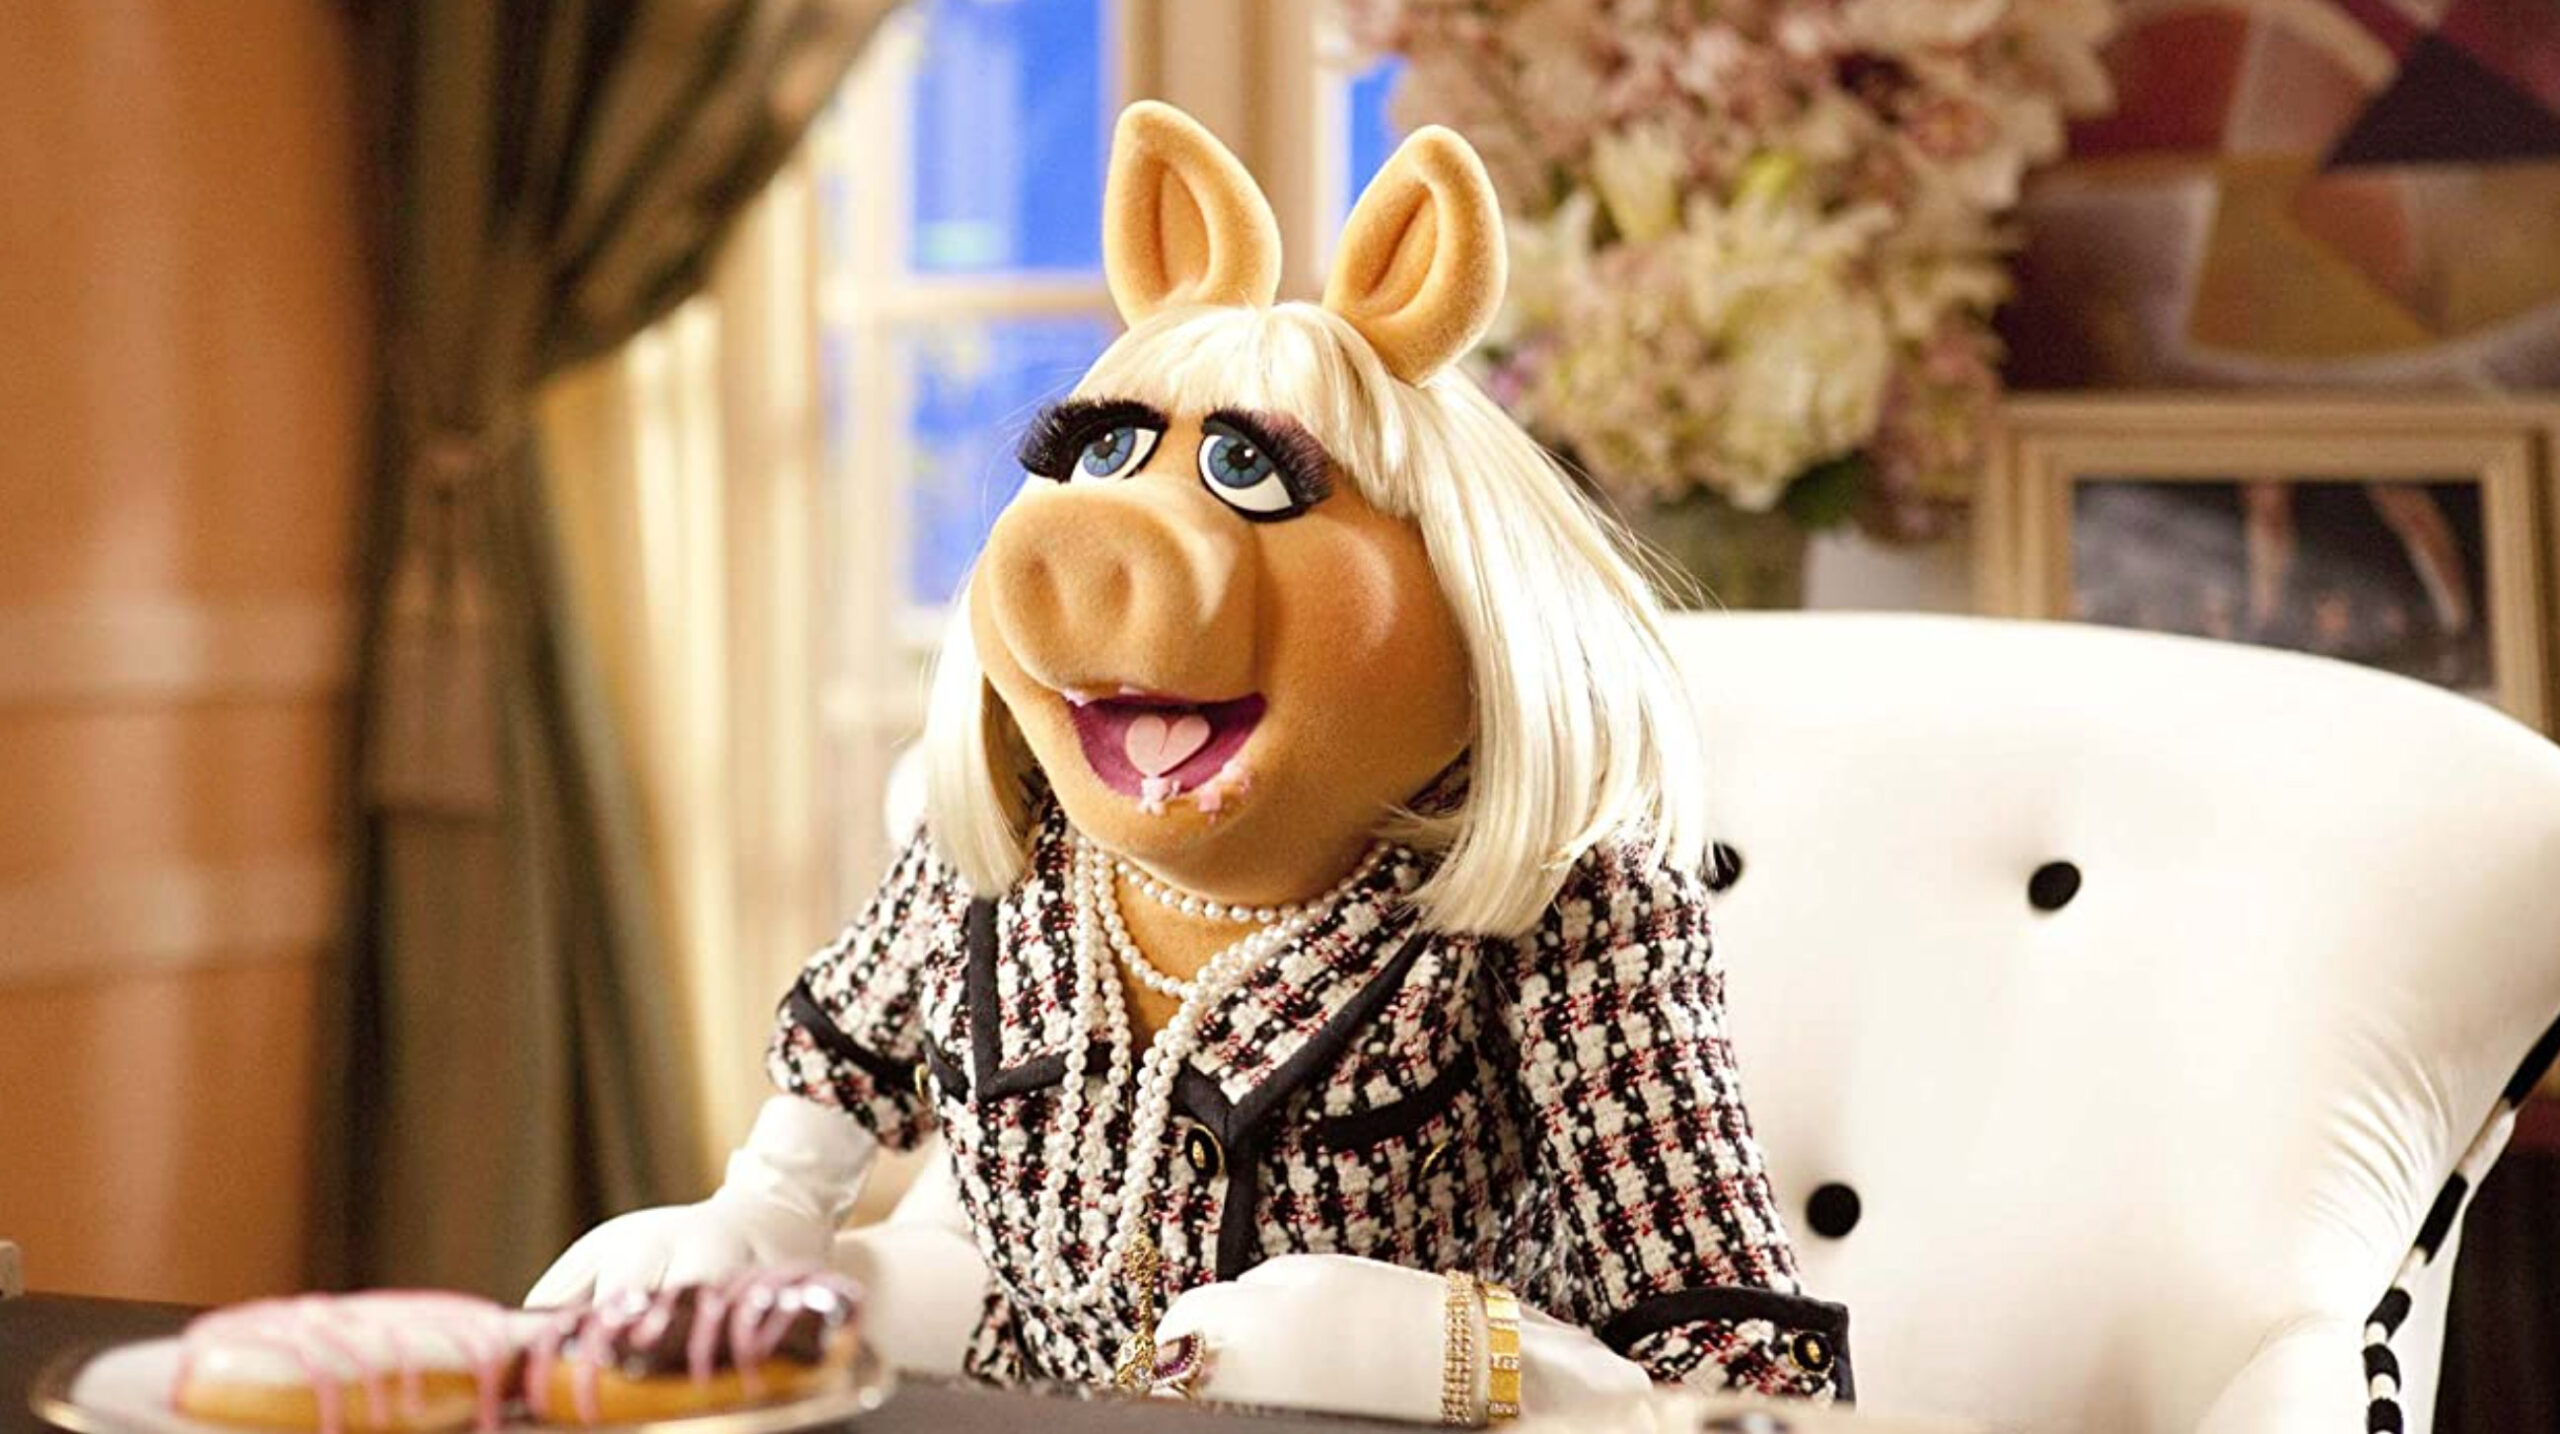 miss piggy's mouth open with donuts in her mouth. She's sitting down on a white chair.